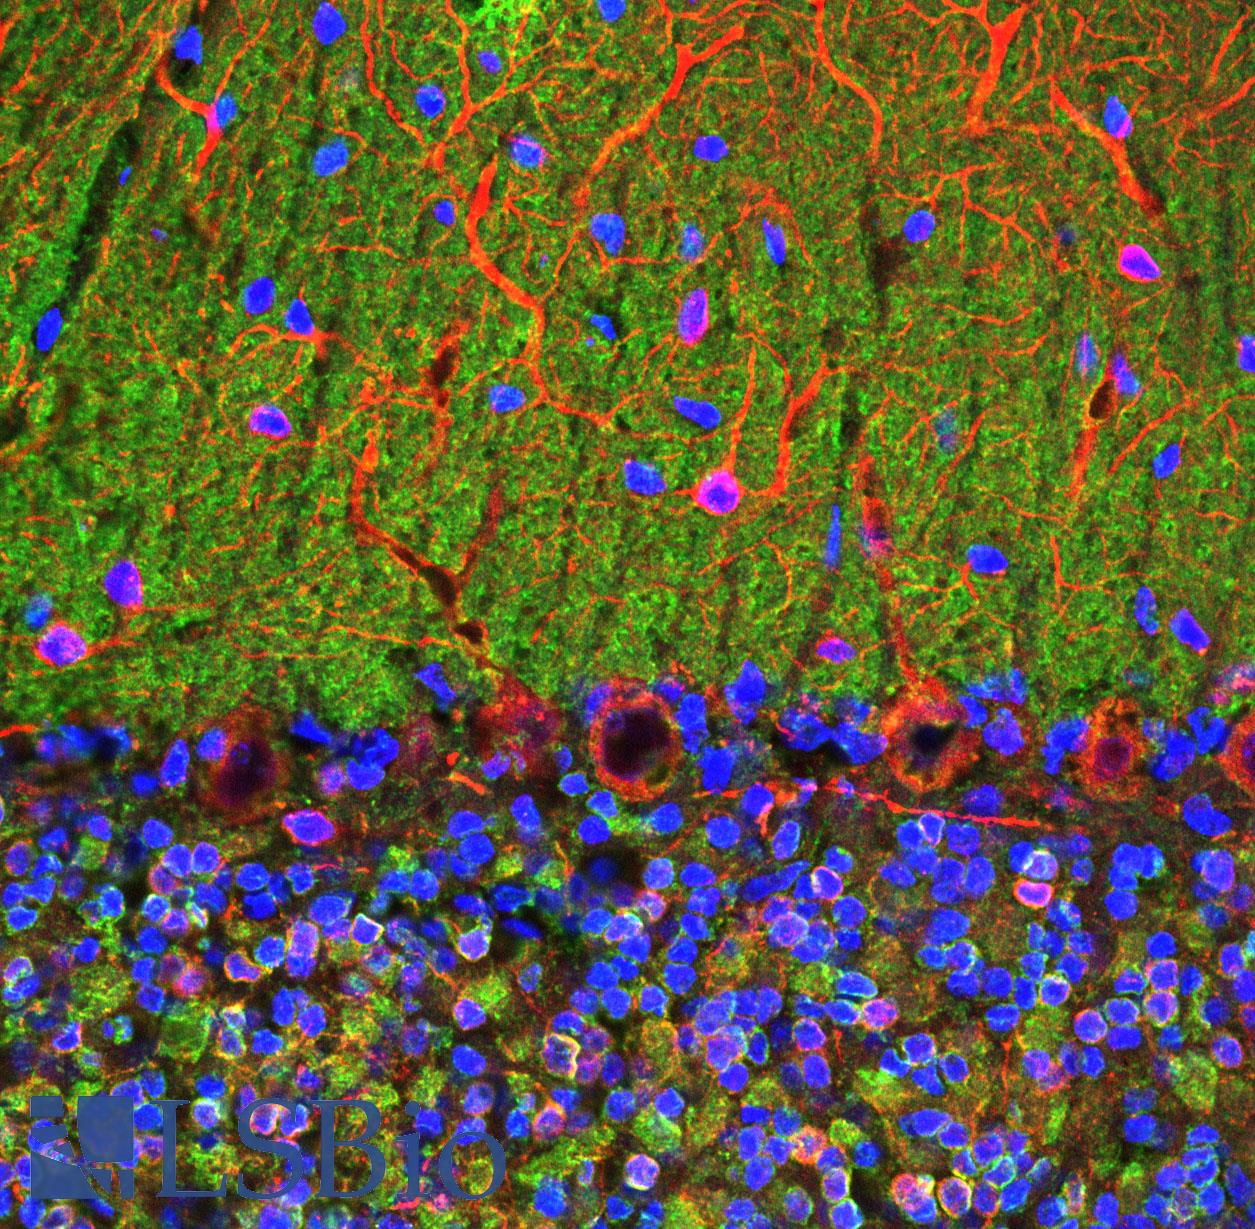 VILIP / VSNL1 Antibody - Confocal image of adult rat cerebellum stained with VILIP / VSNL1 antibody (green), chicken polyclonal antibody to MAP2(red) and DNA (blue). The VILIP / VSNL1 antibody antibody reveals perikarya and synaptic regions in the neuron rich granular layer (bottom) and synapse rich molecular layer (top). Note that the large prominent Purkinje neurons at the junction of these two layers do not stain with this antibody, in line with the findings of others.